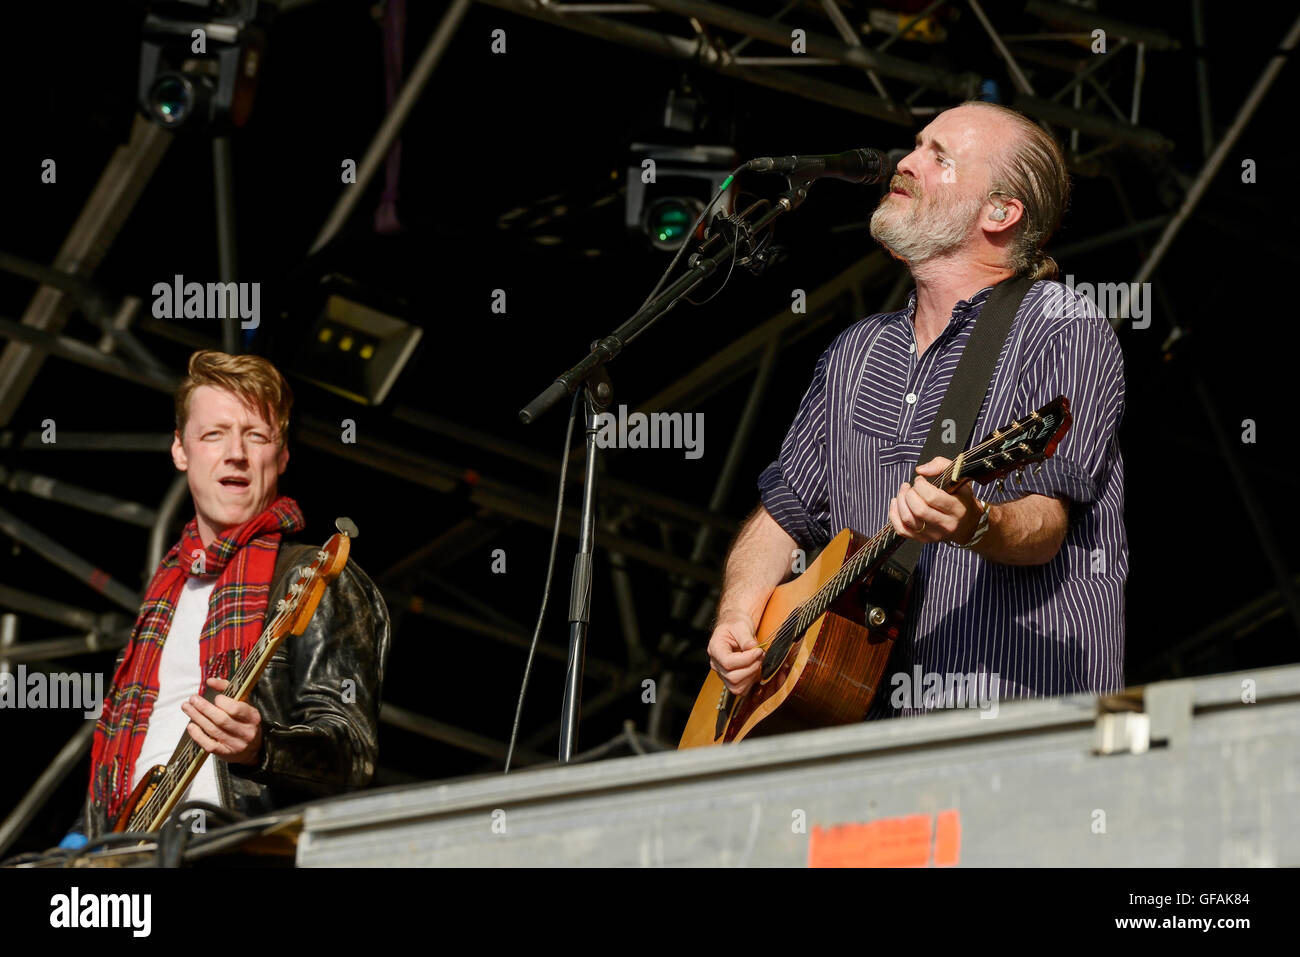 Carfest North, Bolesworth, Cheshire, UK. 29th July 2016. Travis performing on the main stage. The event is the brainchild of Chris Evans and features 3 days of cars, music and entertainment with profits being donated to the charity Children in Need. Andrew Paterson/Alamy Live News Stock Photo